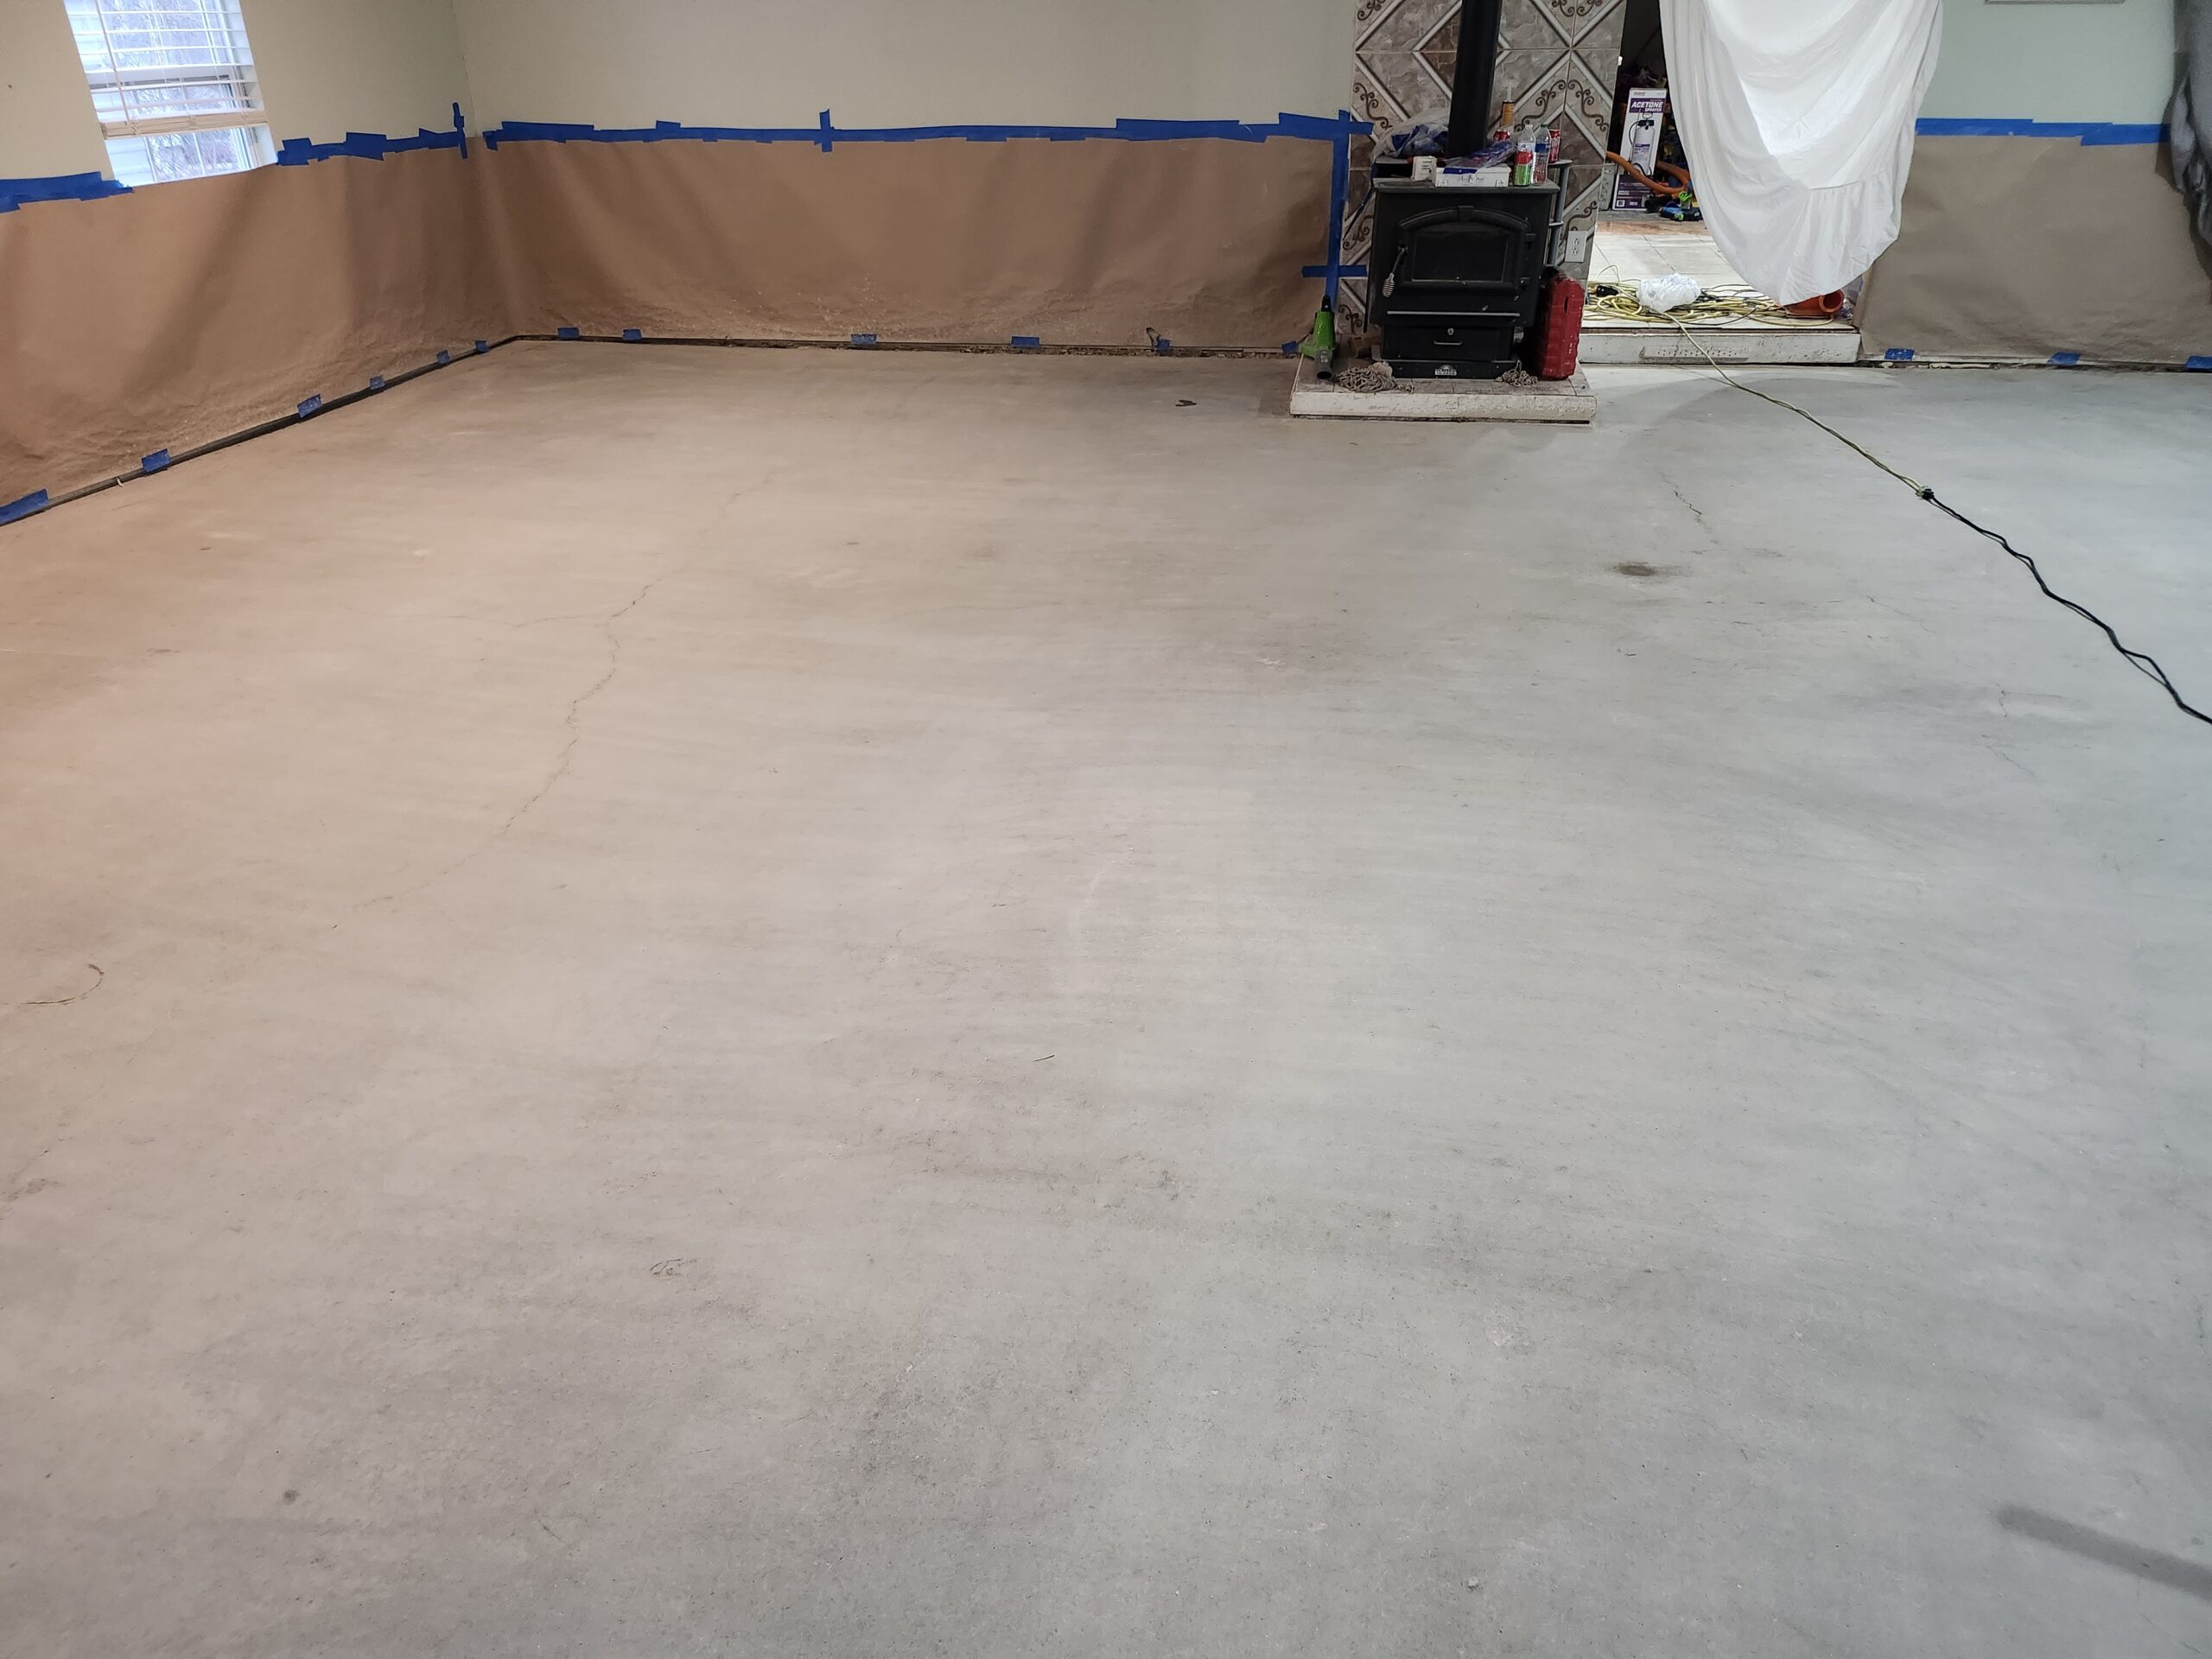 After Cleaning - Smooth, clean concrete floor, free of carpet glue and ready for dye application